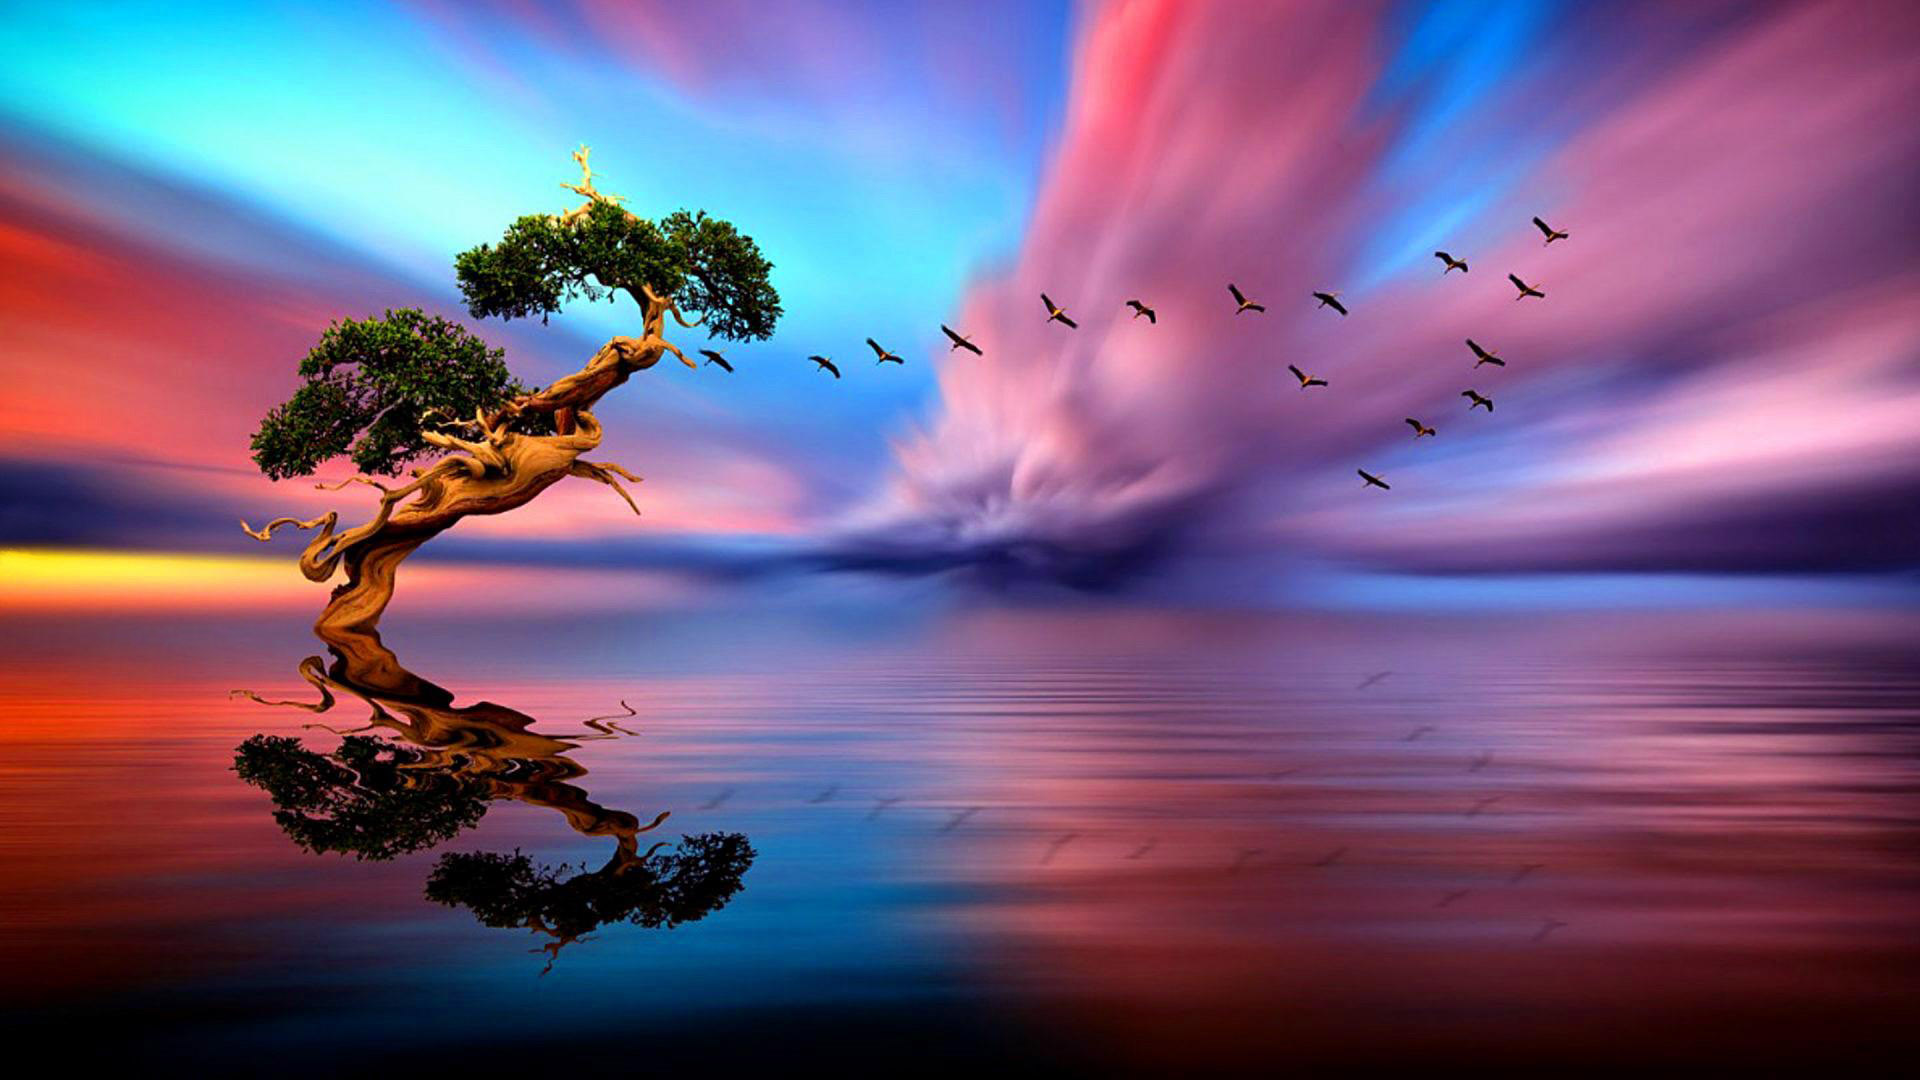 Lonely Tree Sunset Lake Birds In Flight Horizon Art Images Hd Wallpapers  And Background Computer Smartphone And Tablet 1920x1080 : 